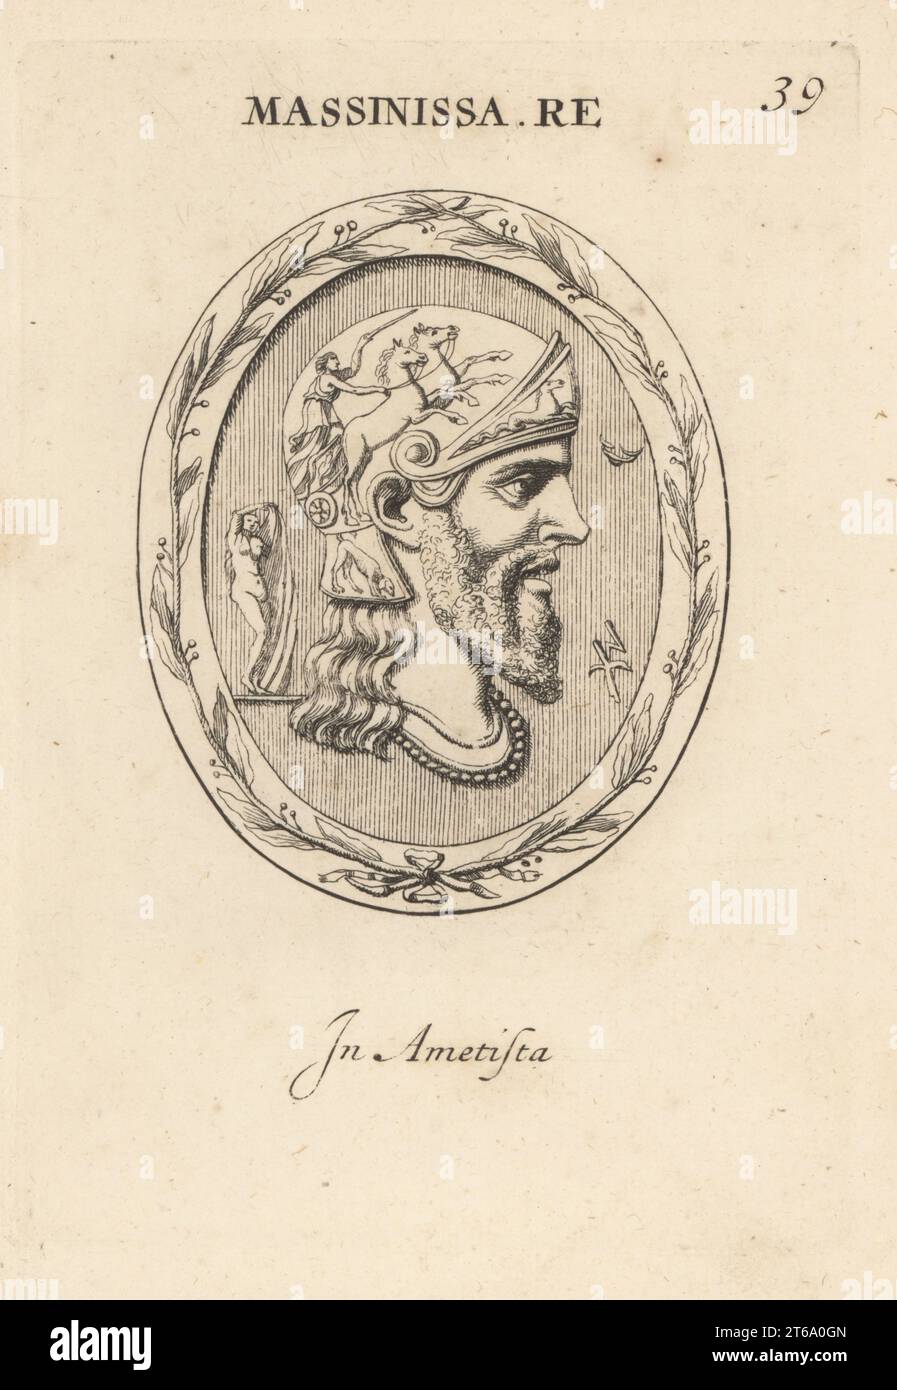 Bust of King Masinissa, c. 238 BC 148 BC, ancient Numidian leader of Massylii Berber tribes during the Second Punic War. In helmet with biga war chariot. In amethyst. Massinissa Re. In Ametista. Copperplate engraving by Giovanni Battista Galestruzzi after Leonardo Agostini from Gemmae et Sculpturae Antiquae Depicti ab Leonardo Augustino Senesi, Abraham Blooteling, Amsterdam, 1685. Stock Photo